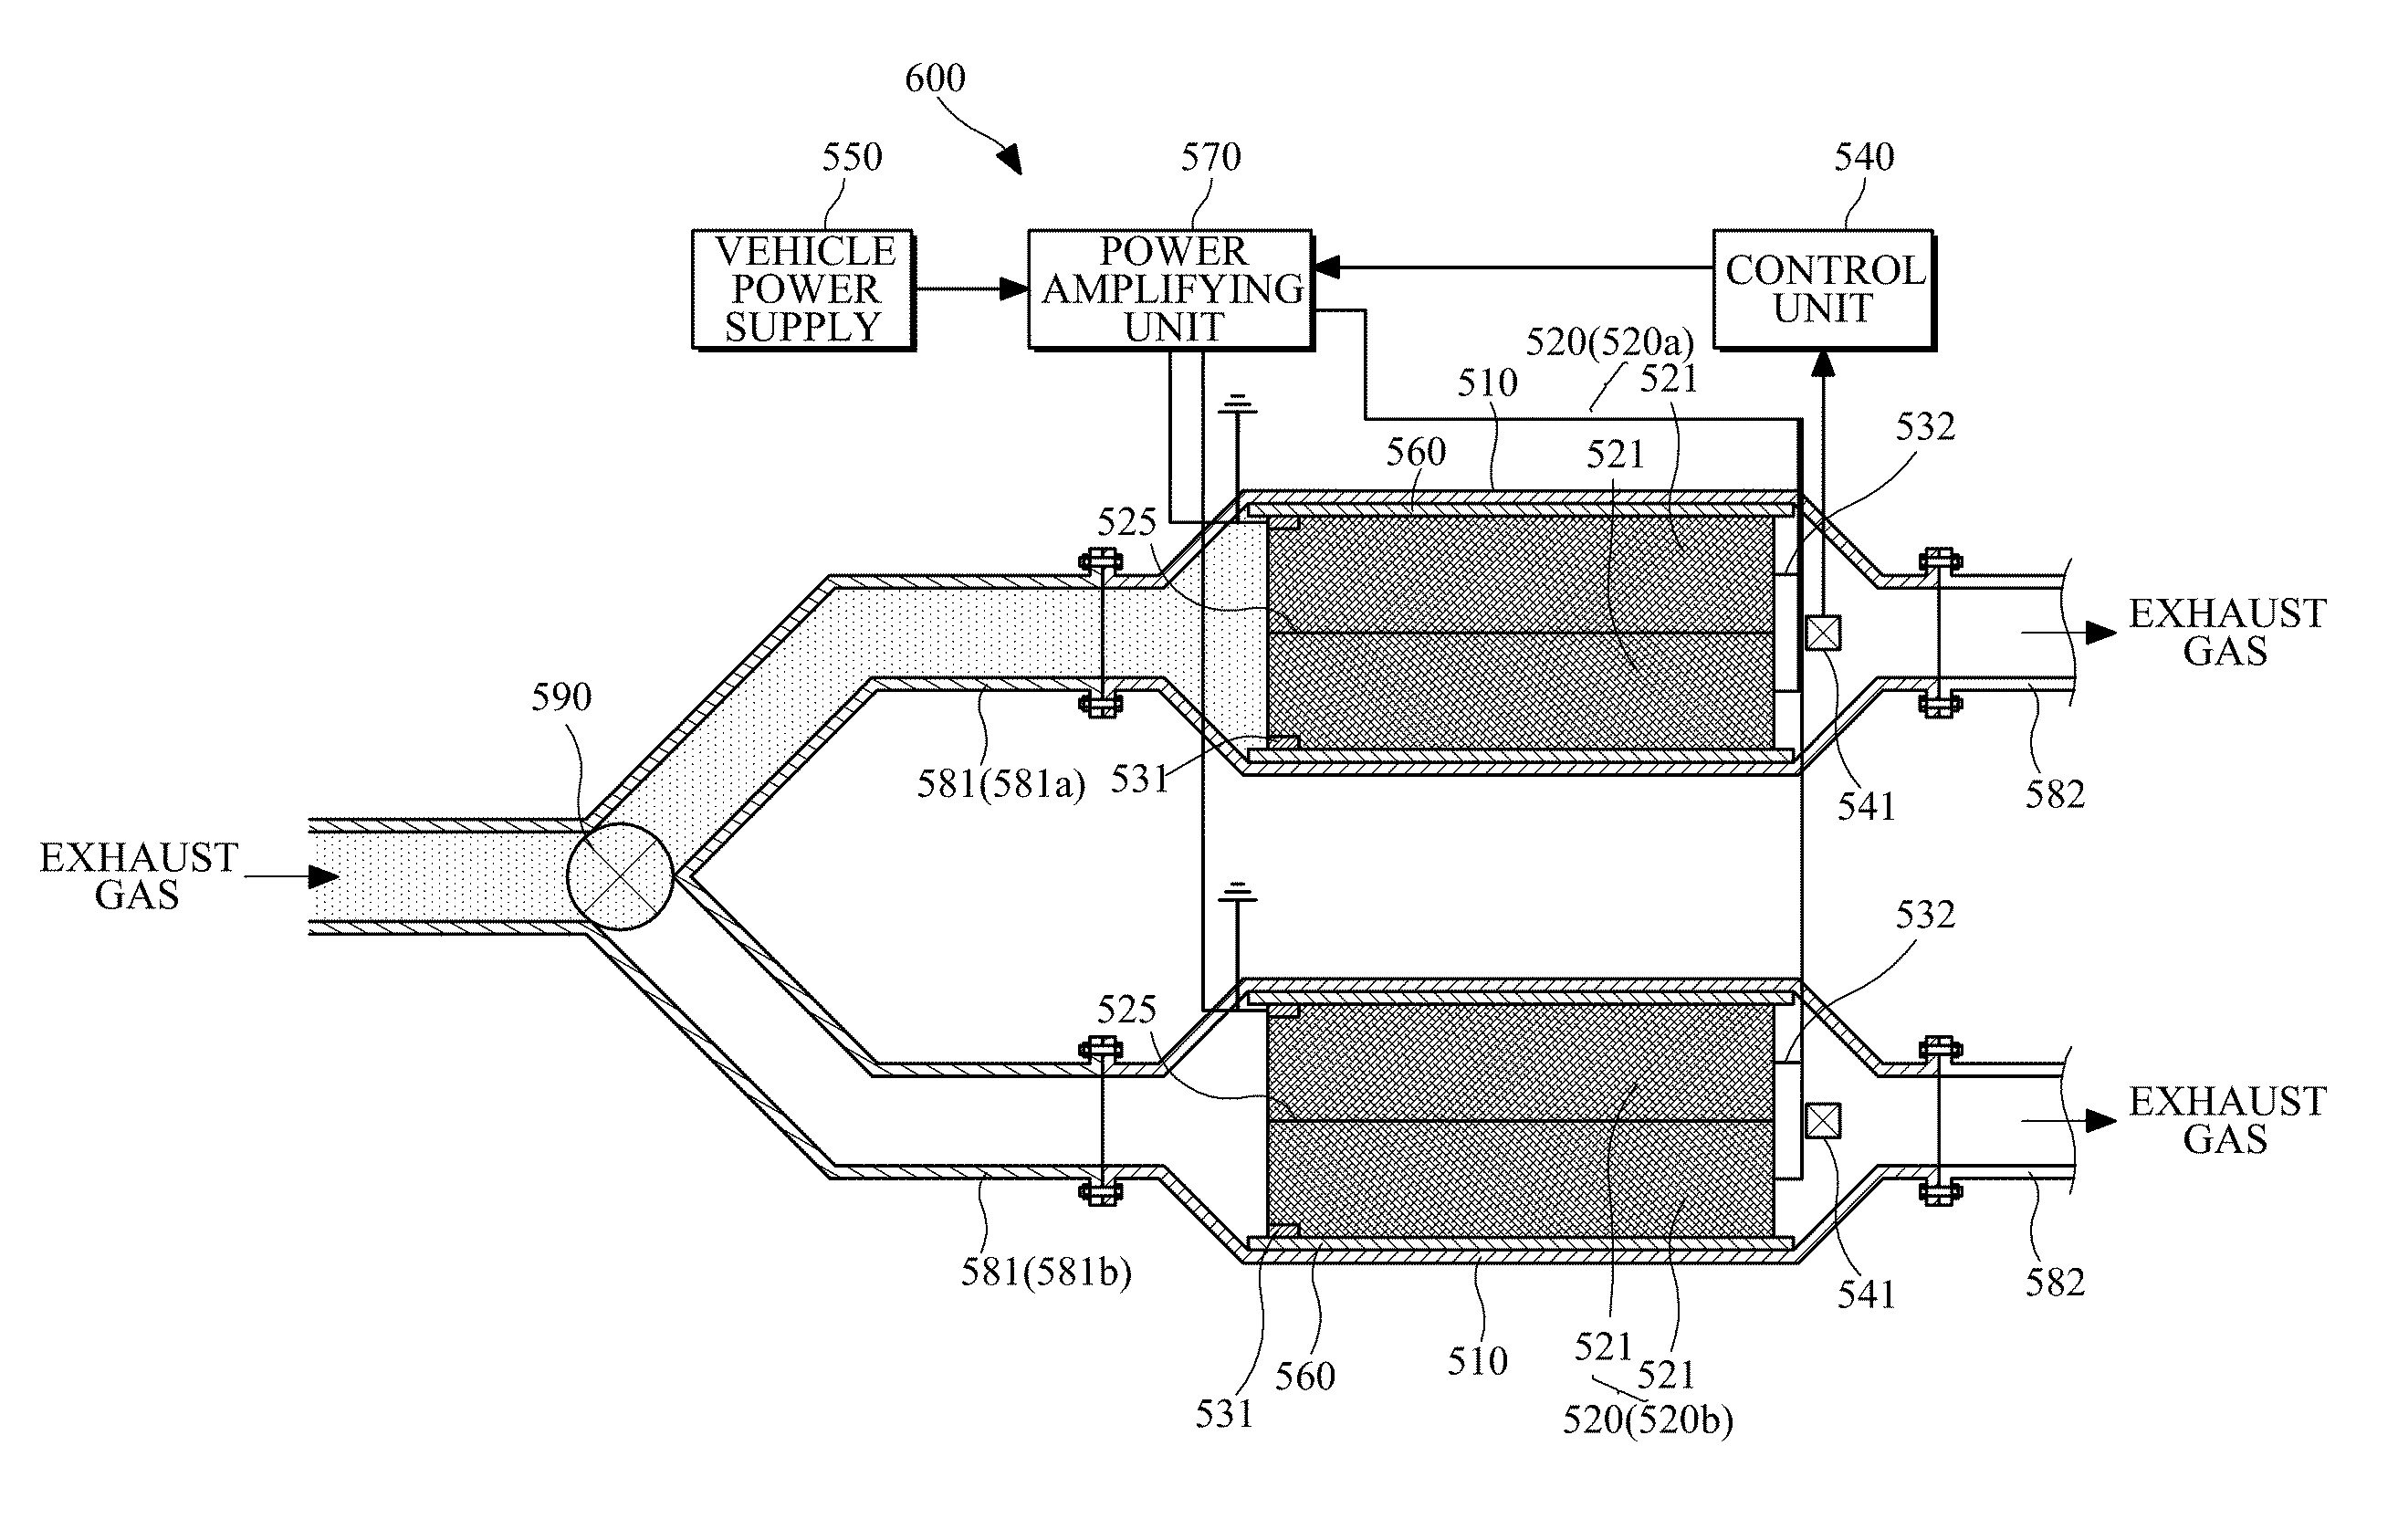 Particulate matter reduction apparatus for diesel engine